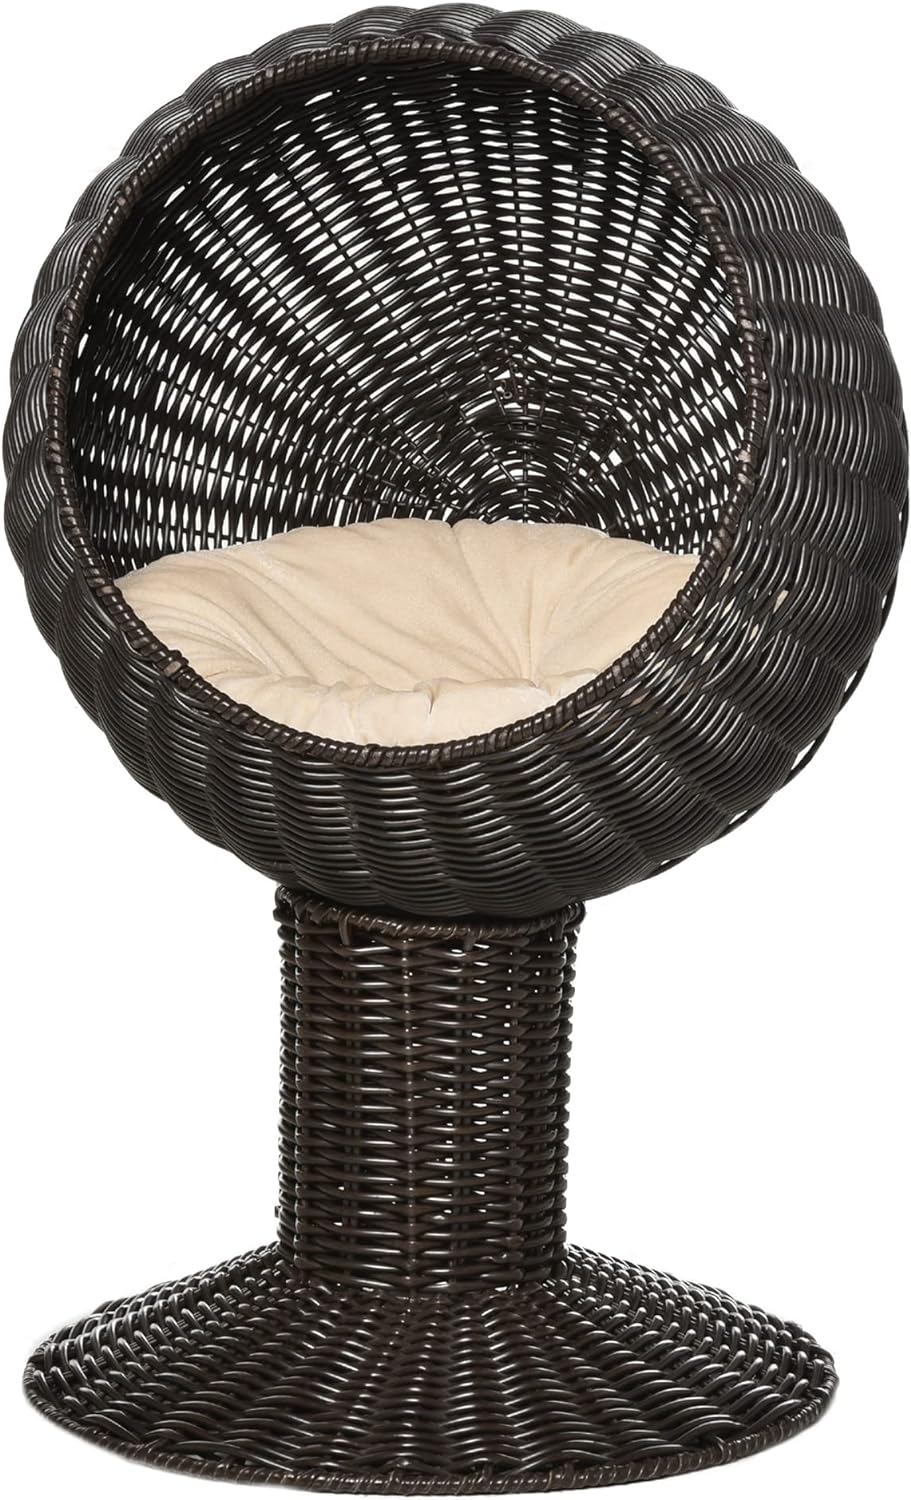 Pawhut 28” Hooded Rattan Wicker Elevated Cat Bed